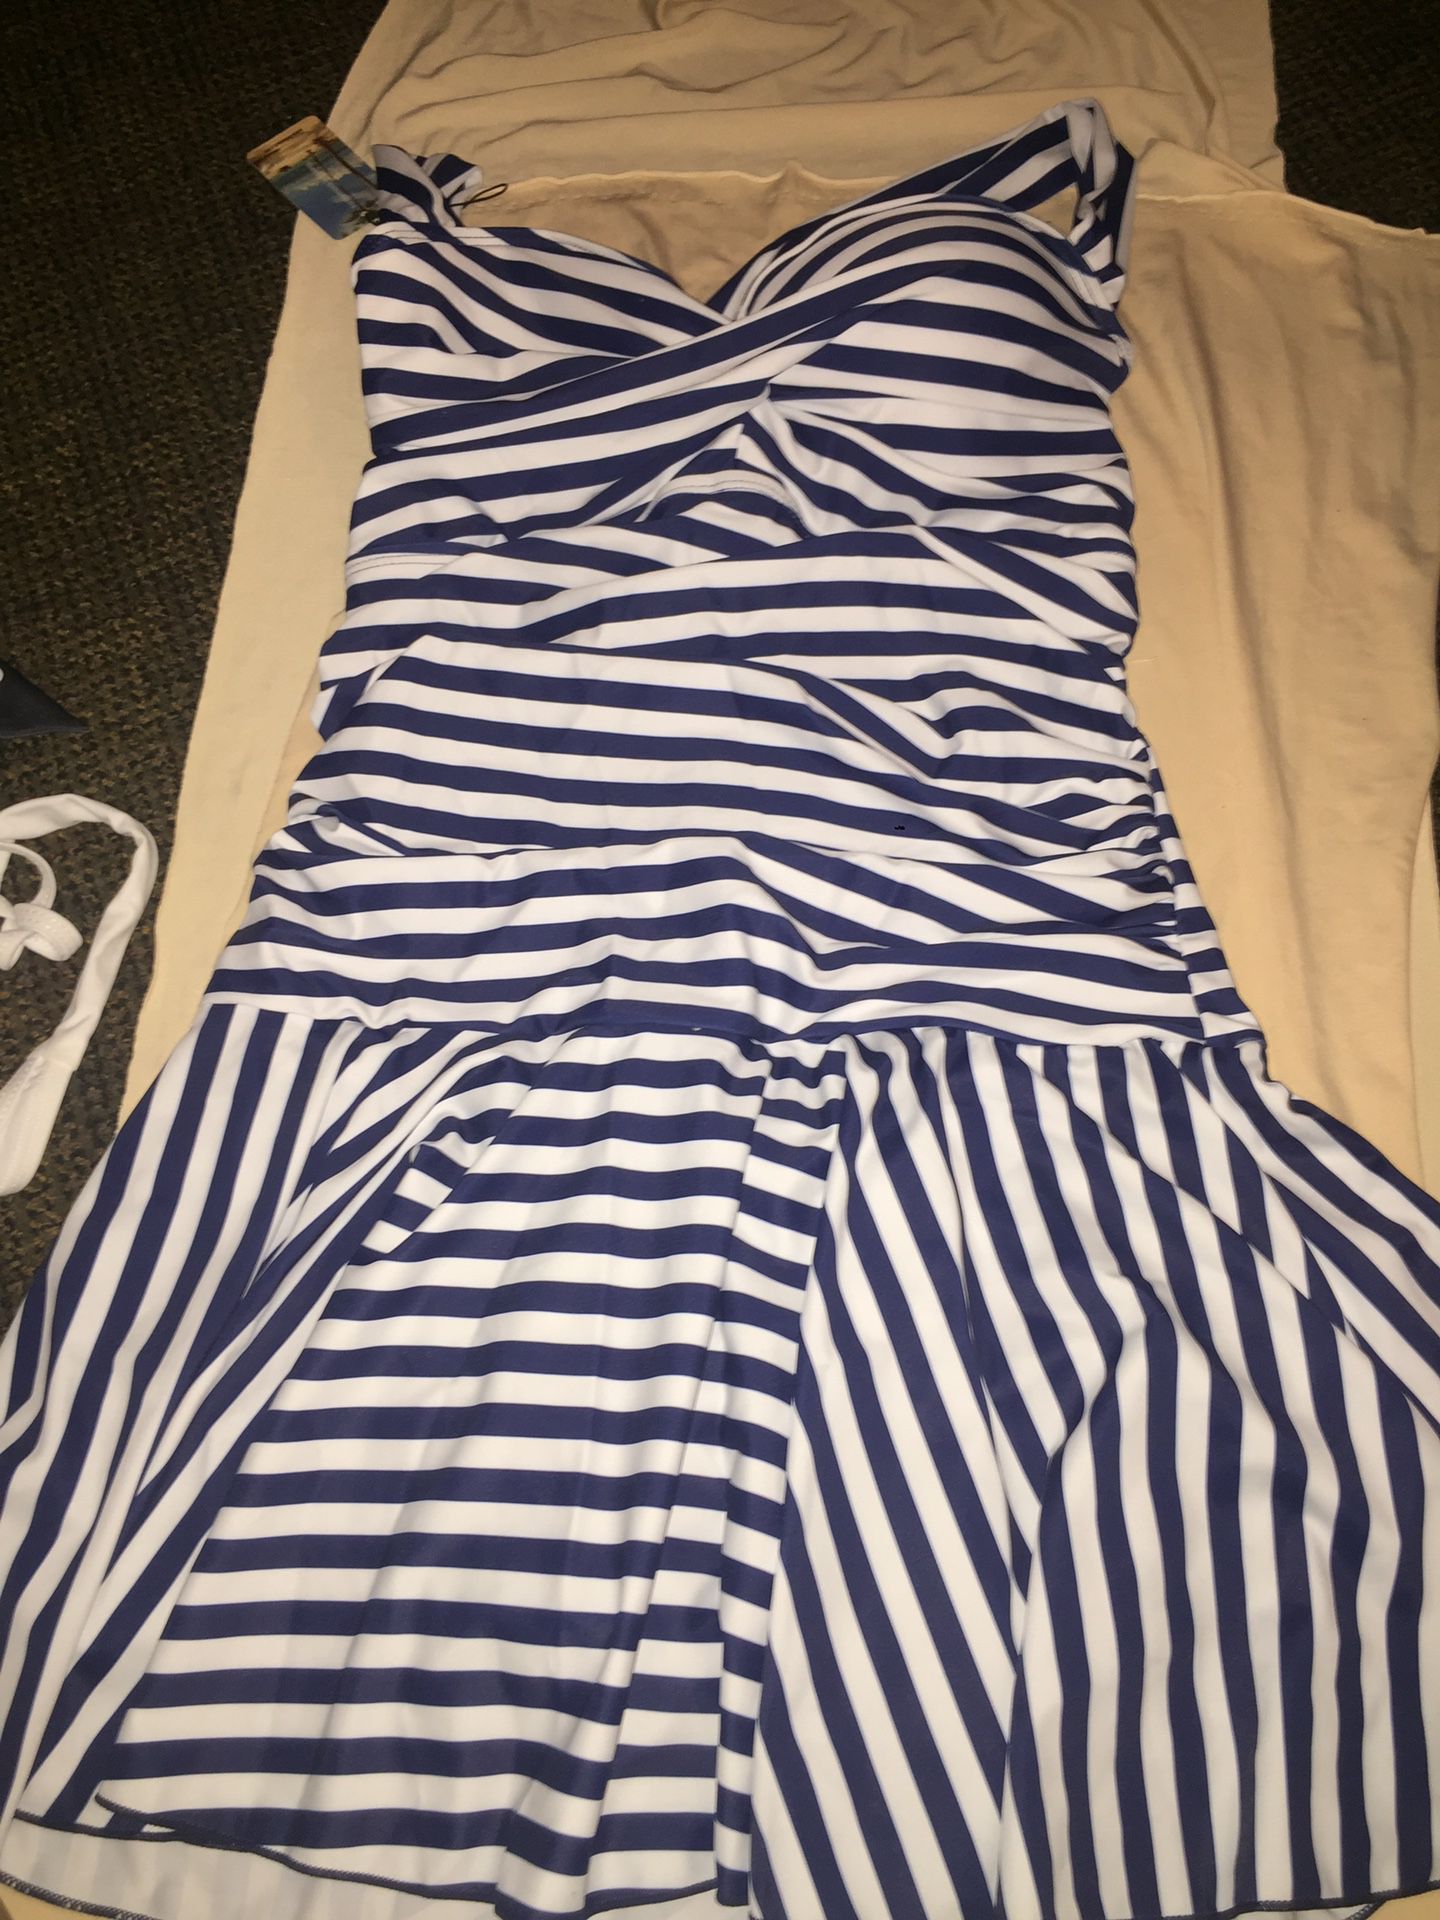 Navy blue and white swimsuit dress (M)